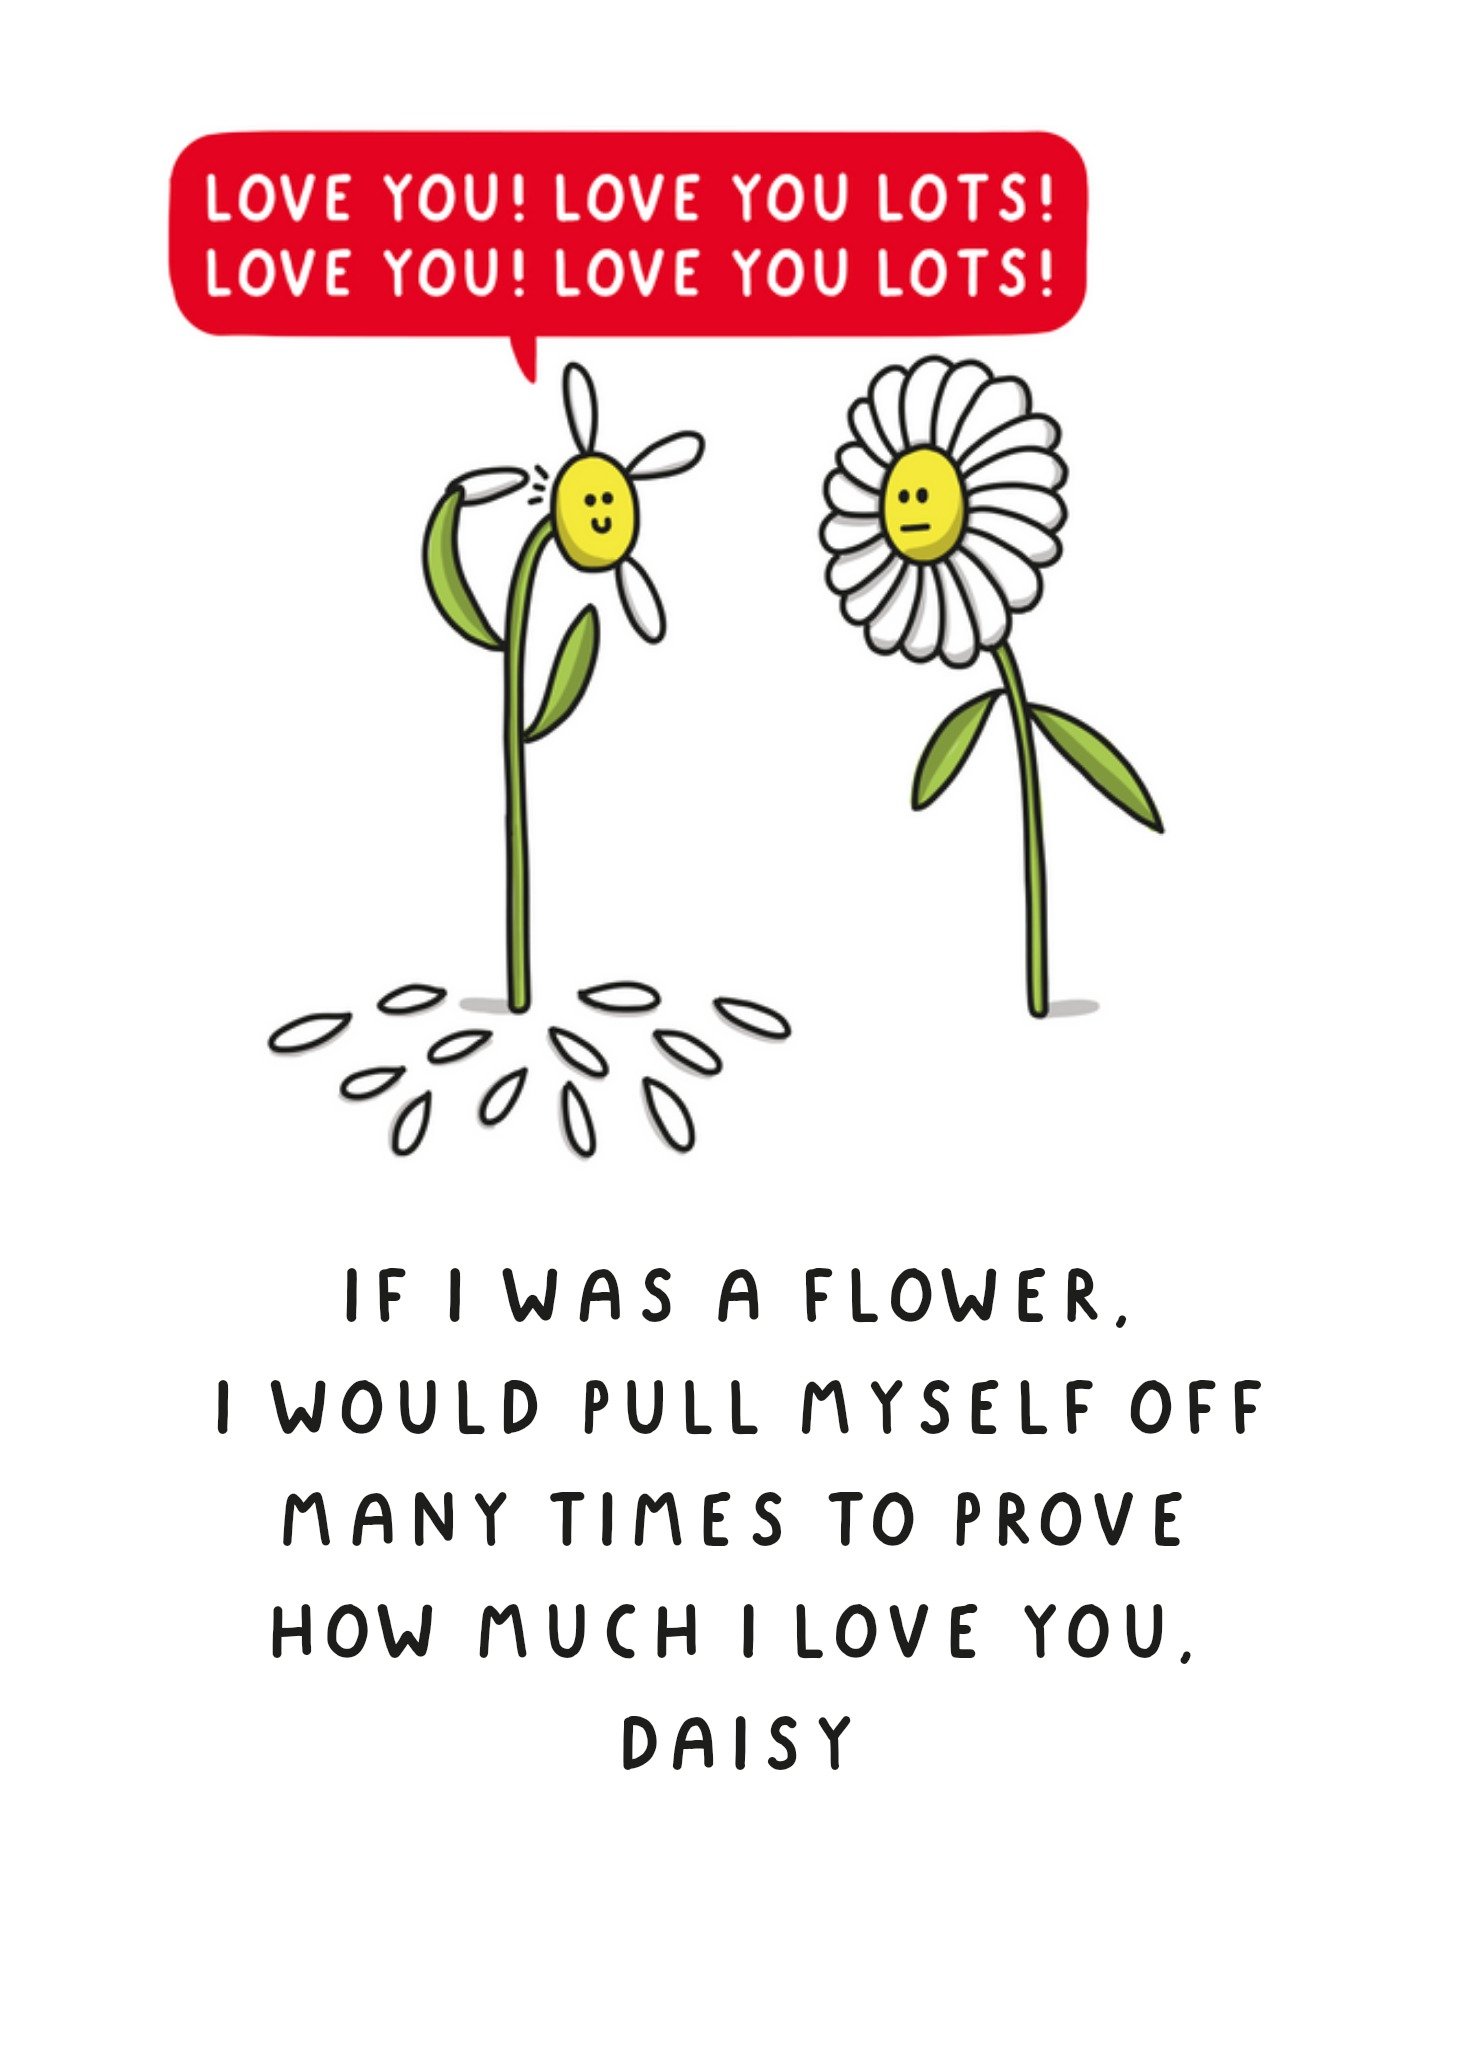 Moonpig Funny If I Was A Flower Illustrated Cartoon Daisies Valentine's Day Card Ecard